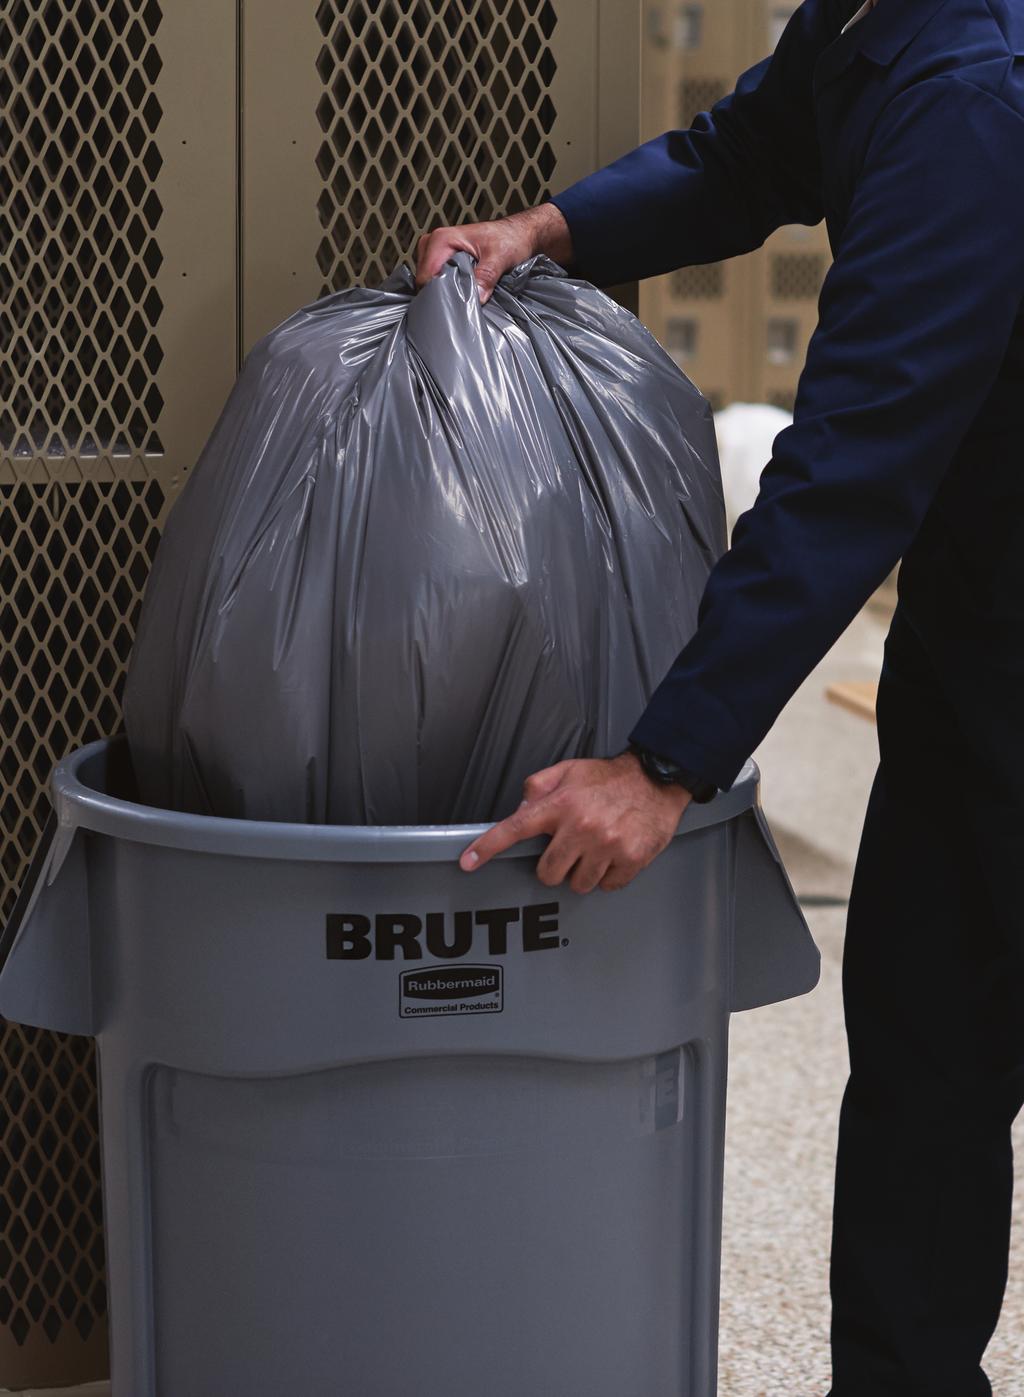 REDUCE TIME AND EFFORT NEEDED TO MANAGE WASTE STREAMS Overexertion is among the leading causes of workplace injuries.